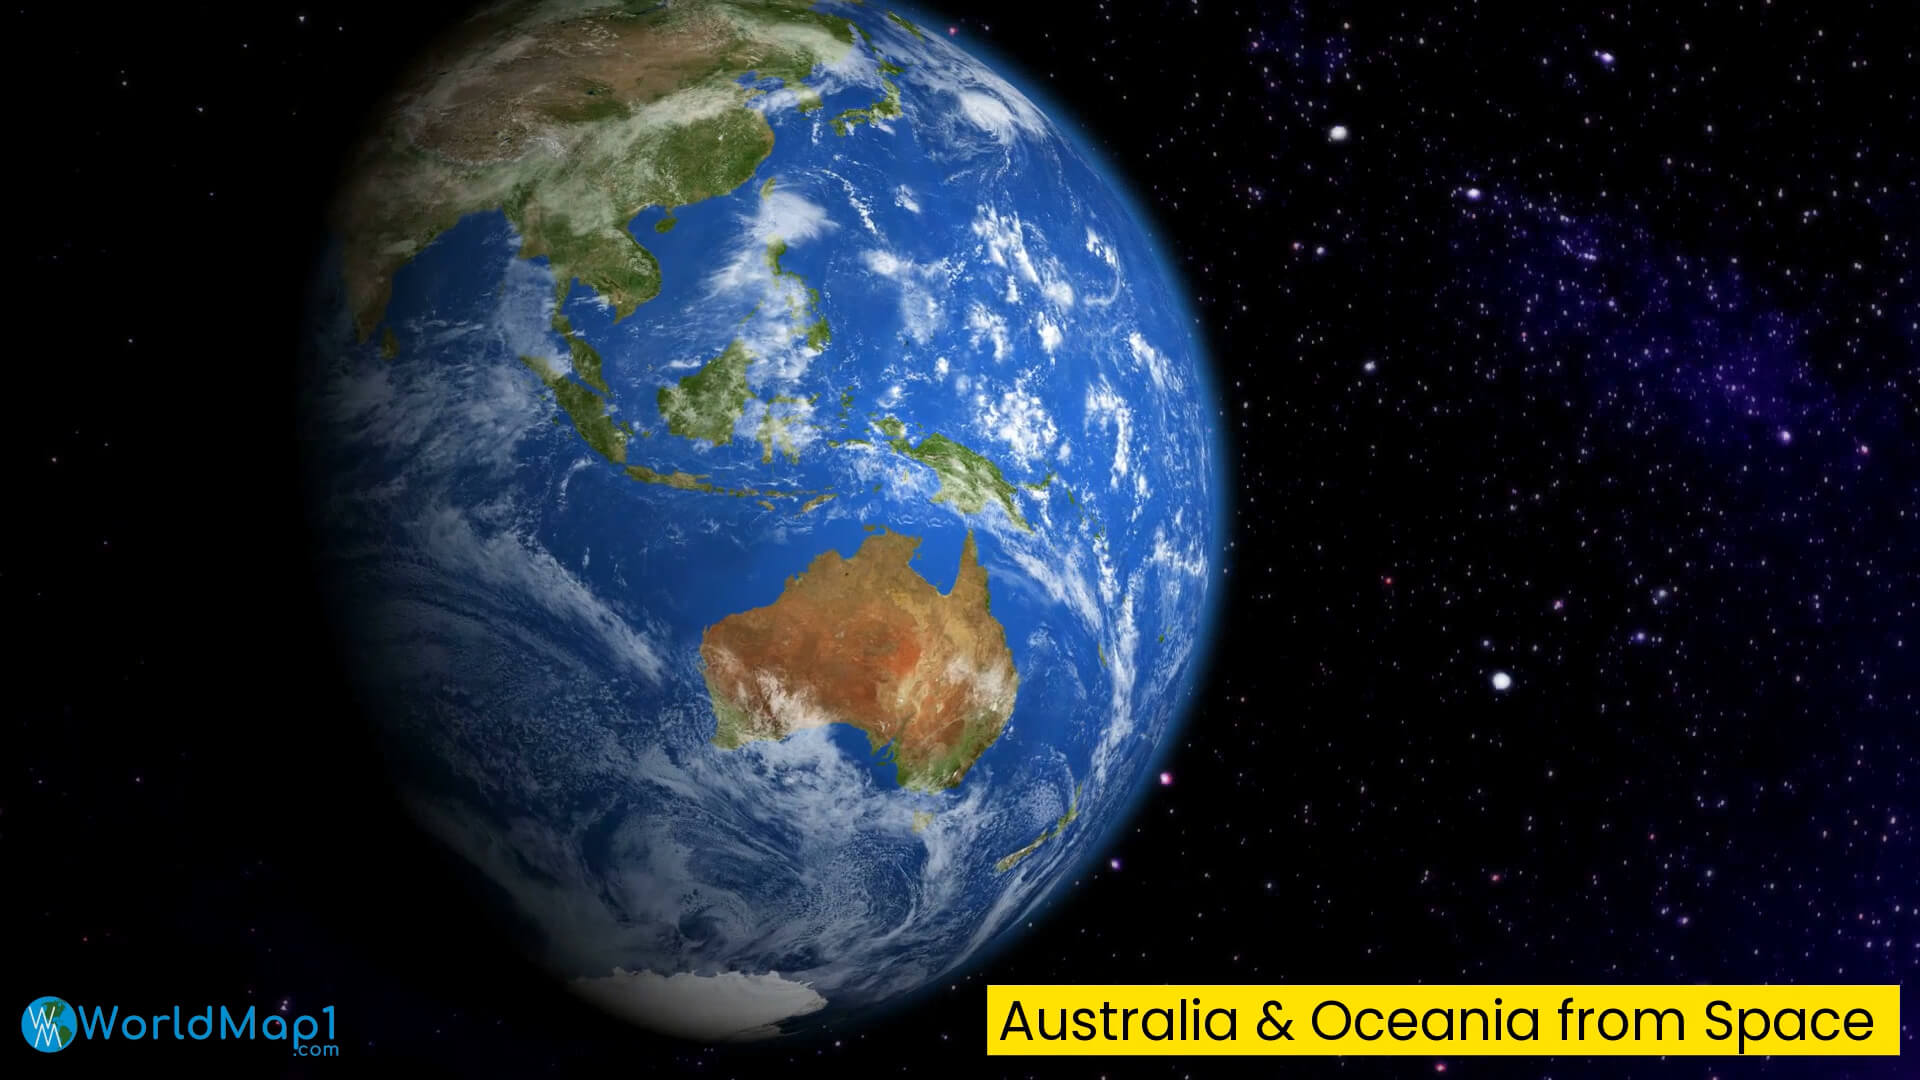 Australia and Oceania from Space